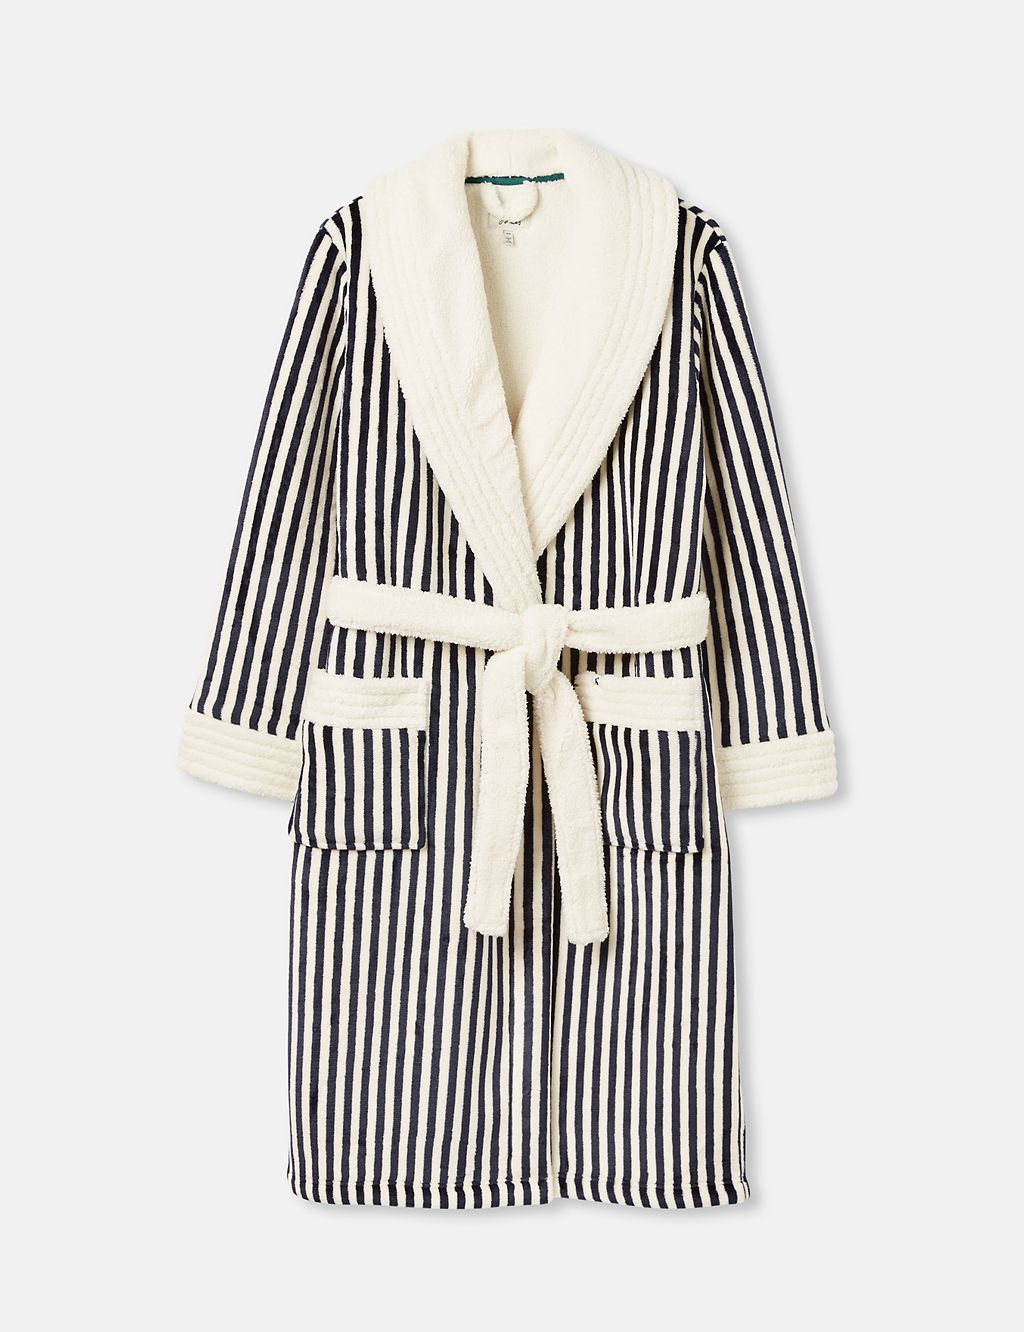 Cotton Modal Striped Dressing Gown | Joules | M&S